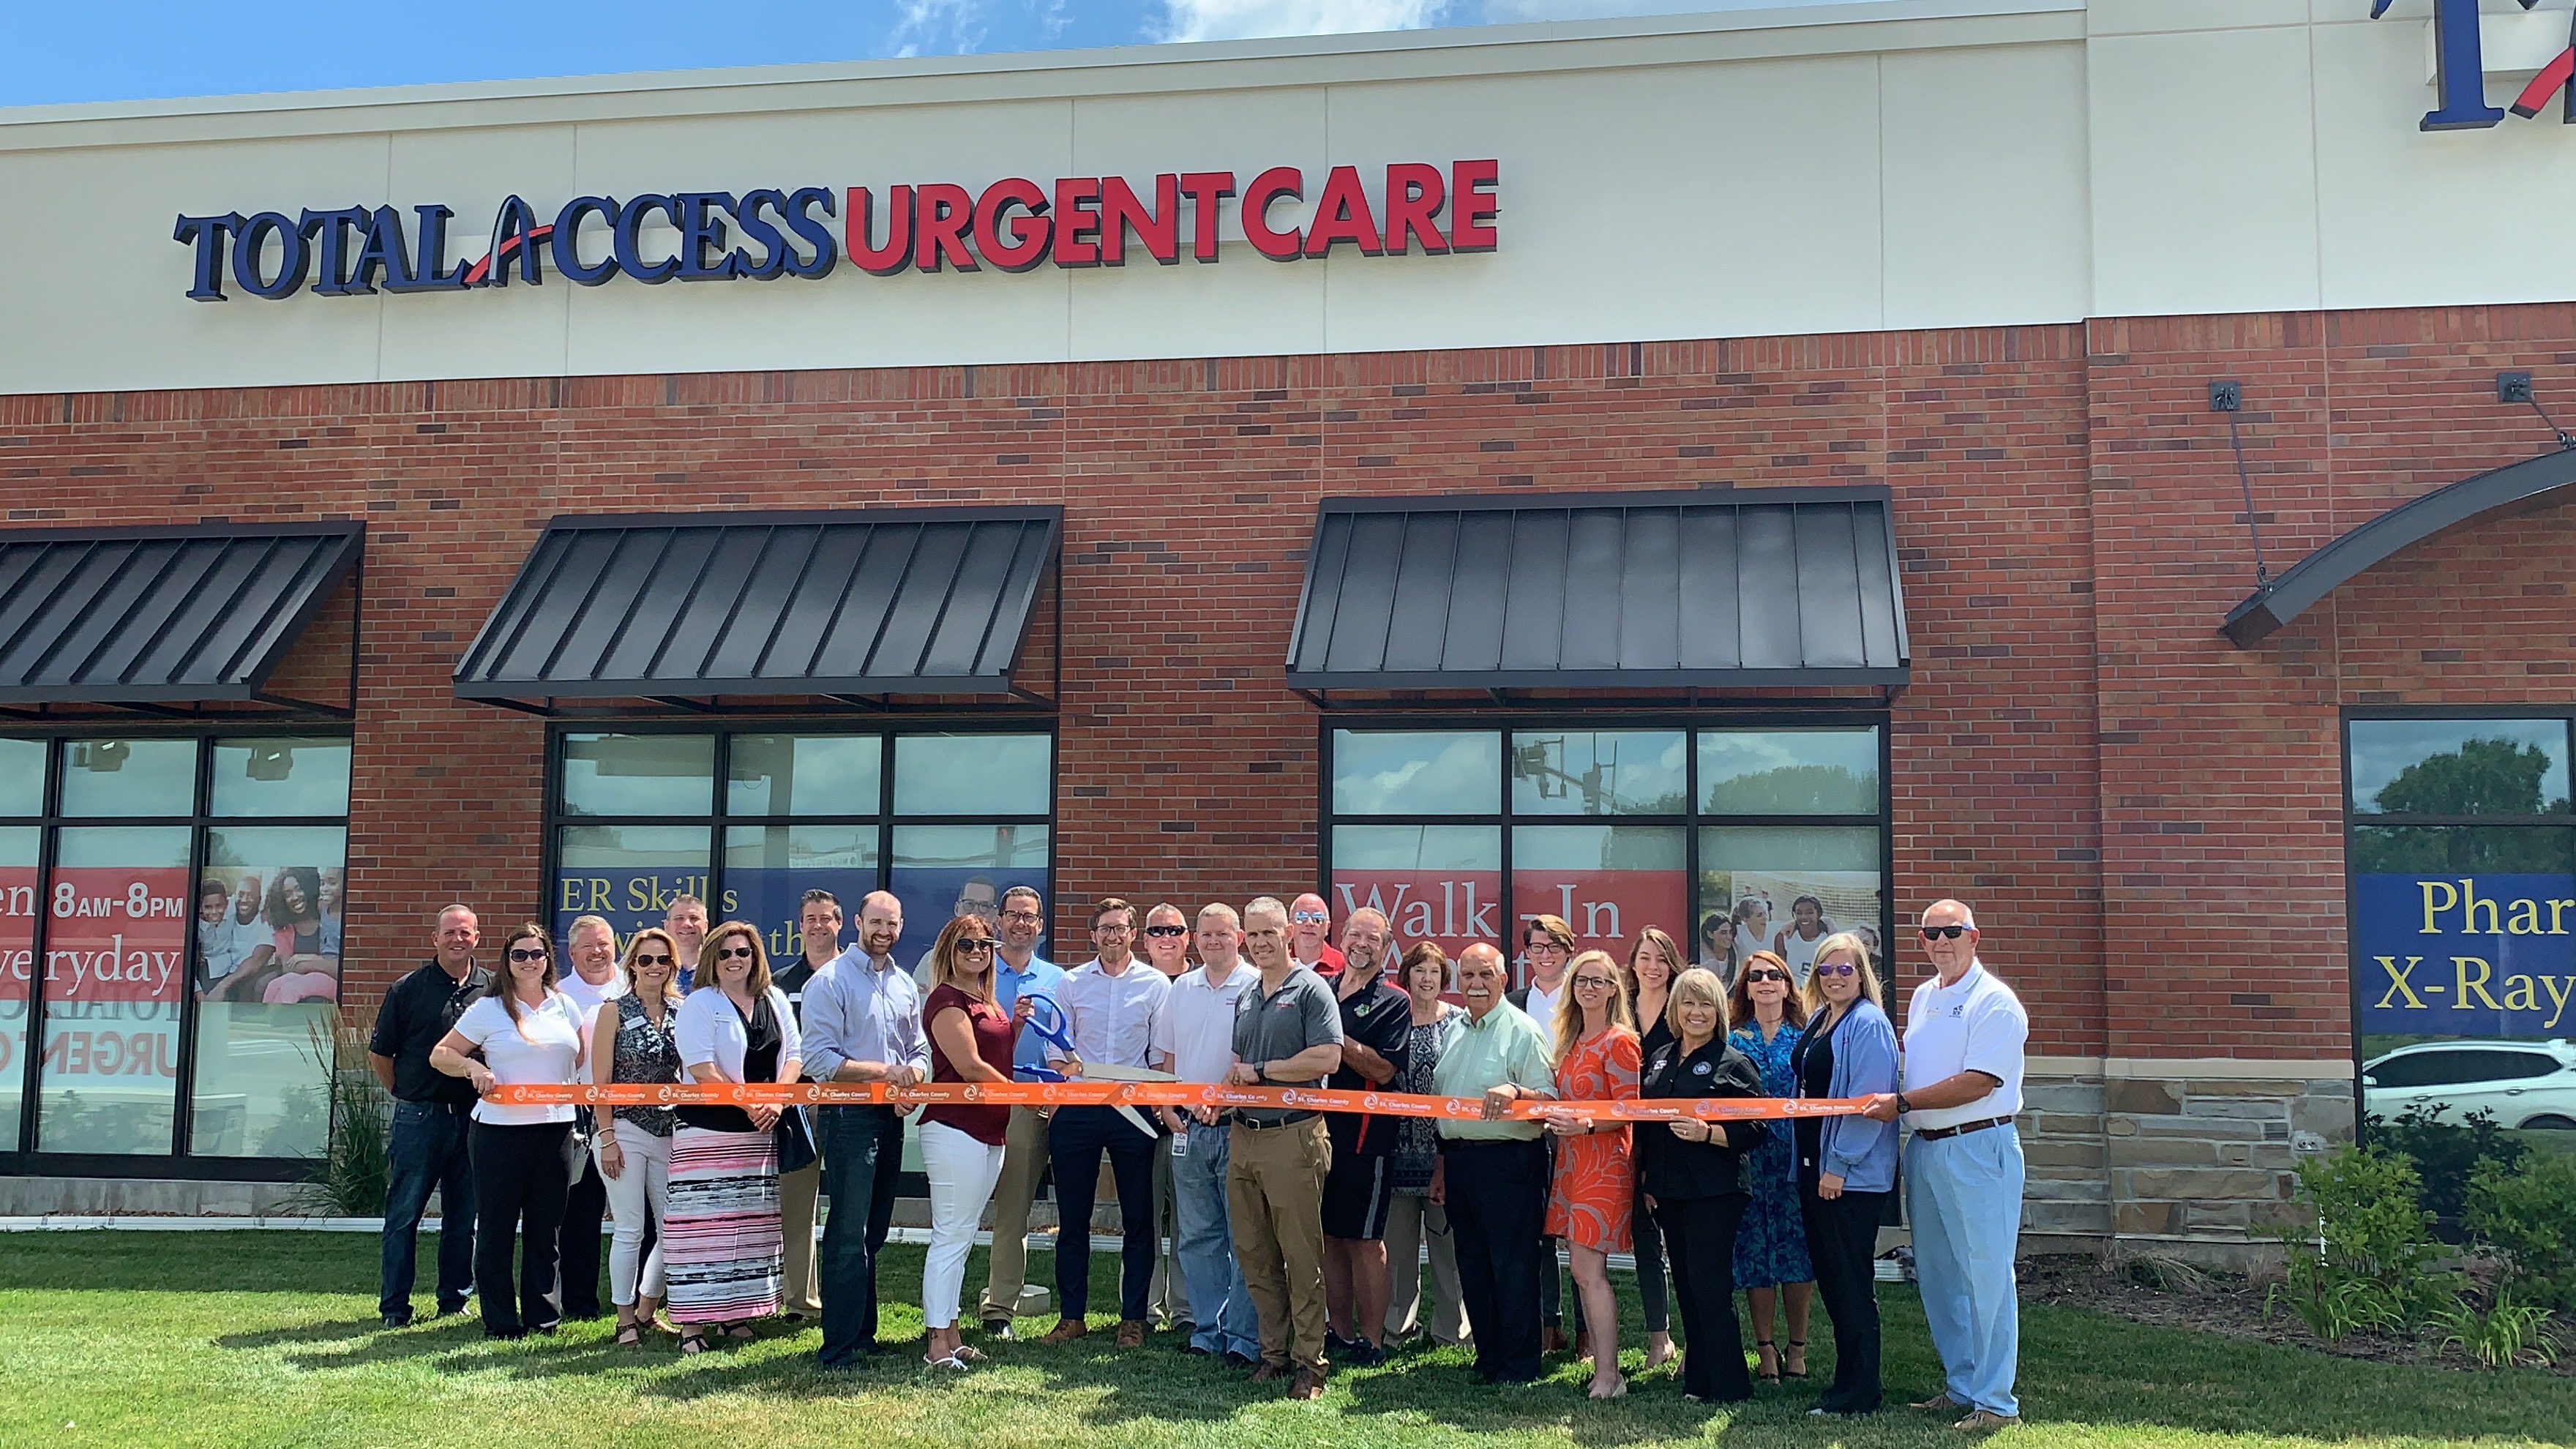 Image for Total Access Urgent Care Celebrates Their Grand Opening in St. Peters with Ribbon Cutting